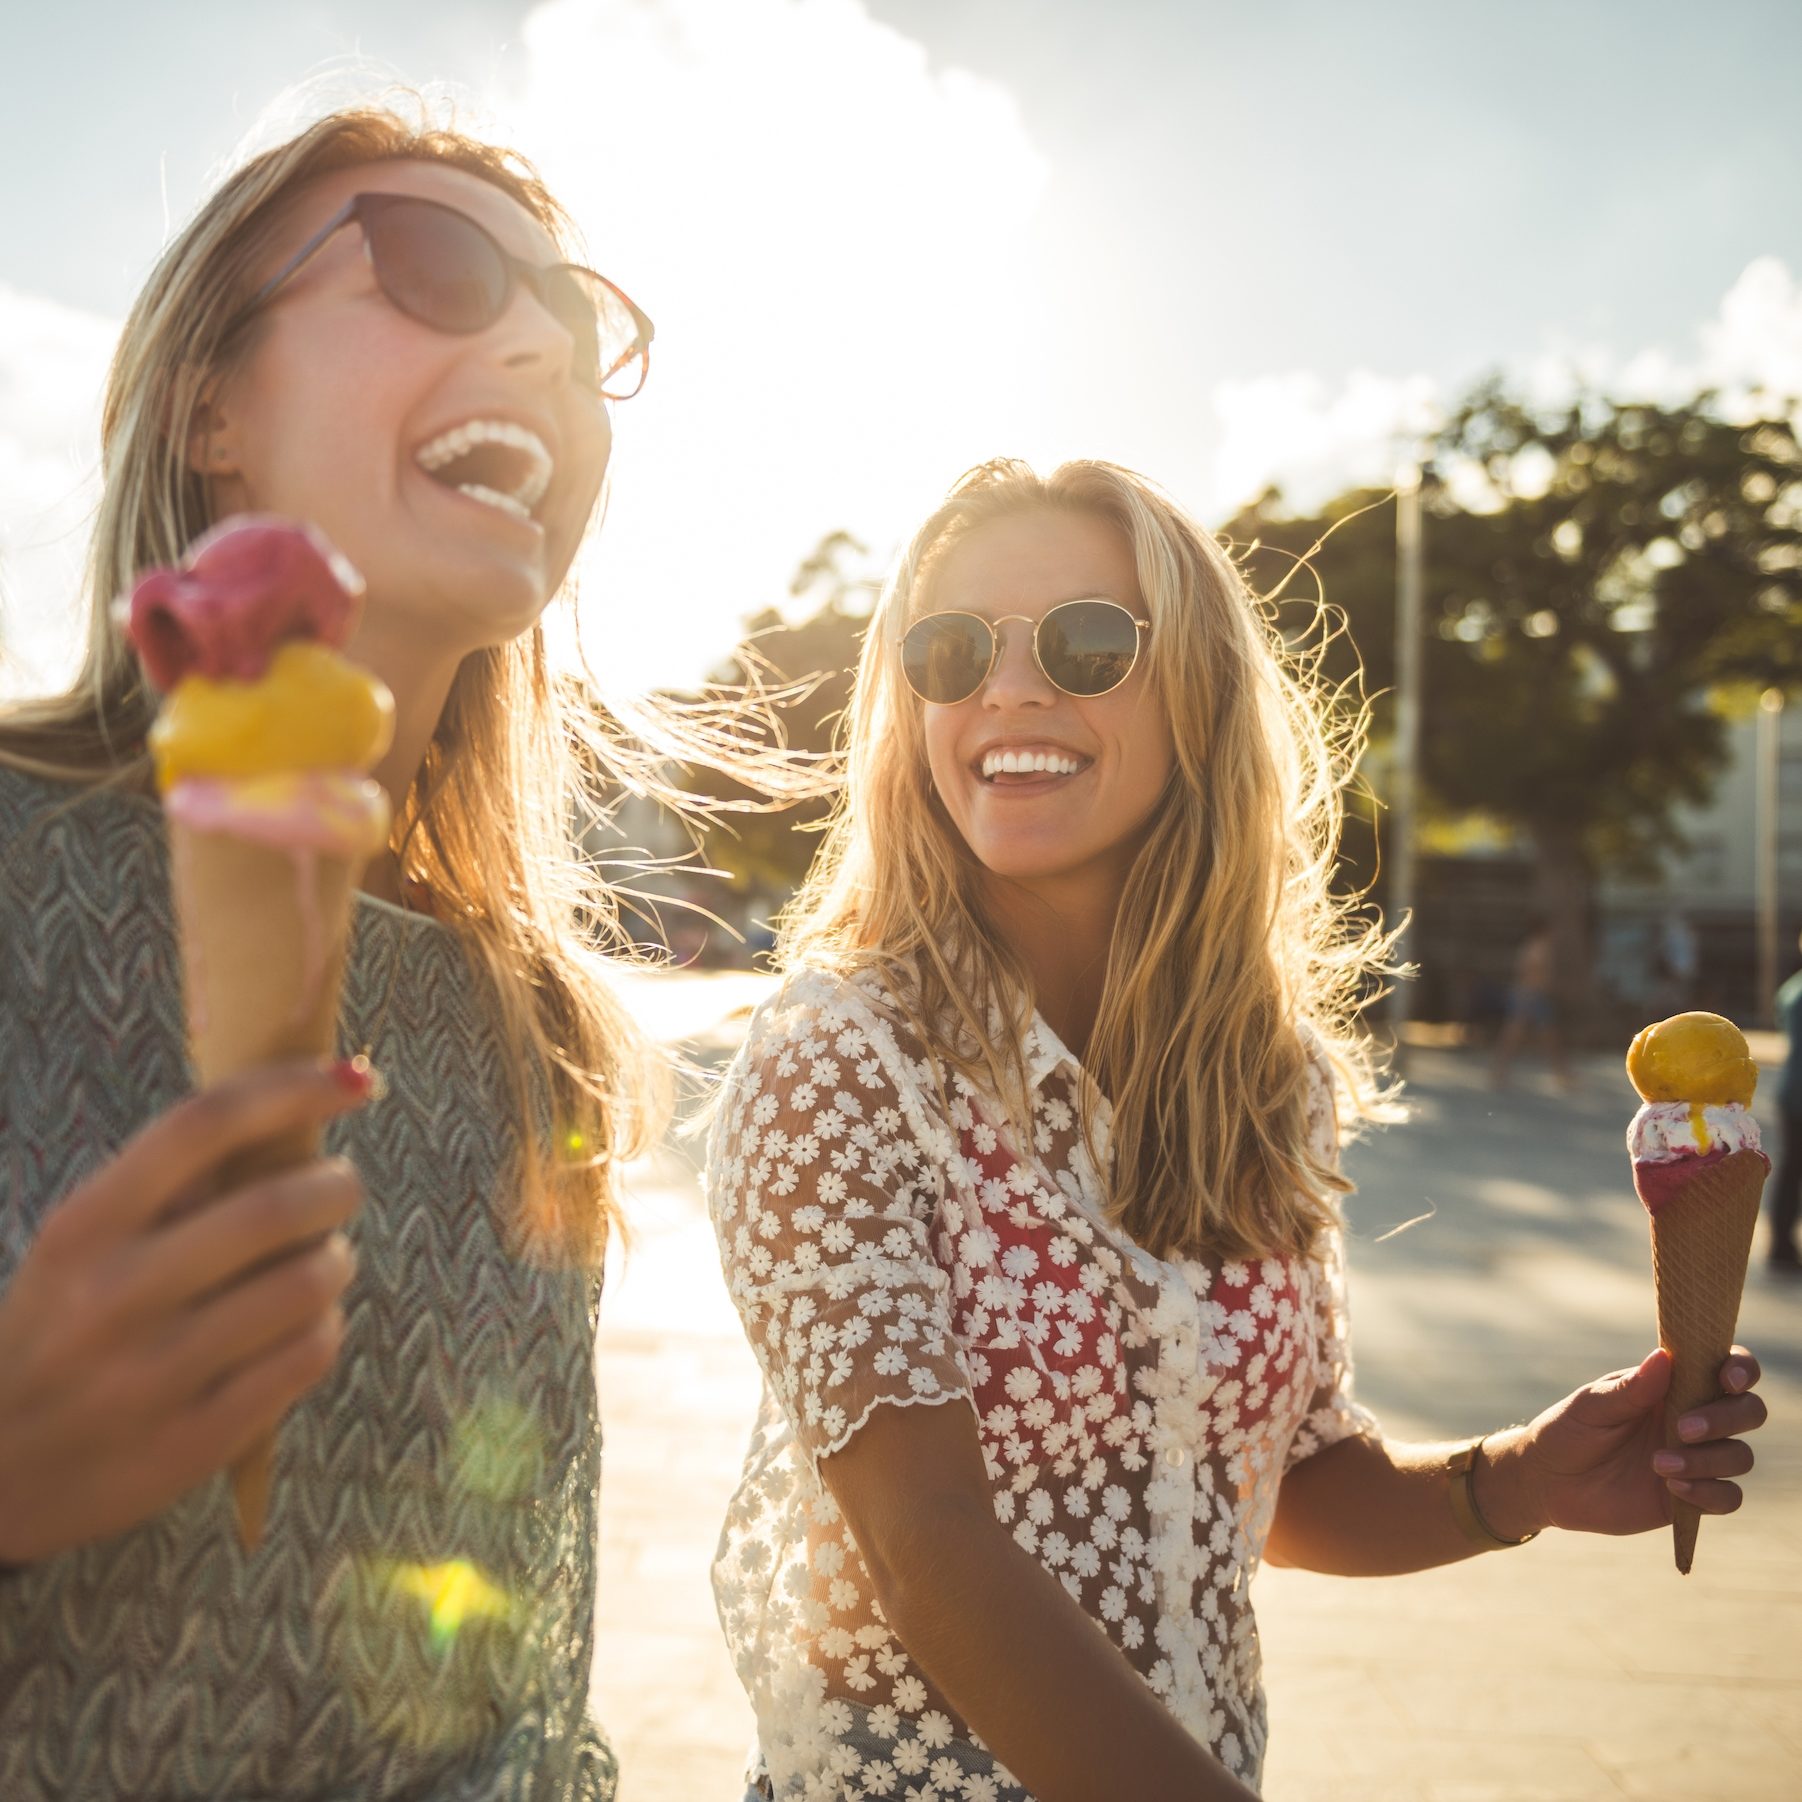 Two teens holding cones of ice creams, smiling and enjoying their day